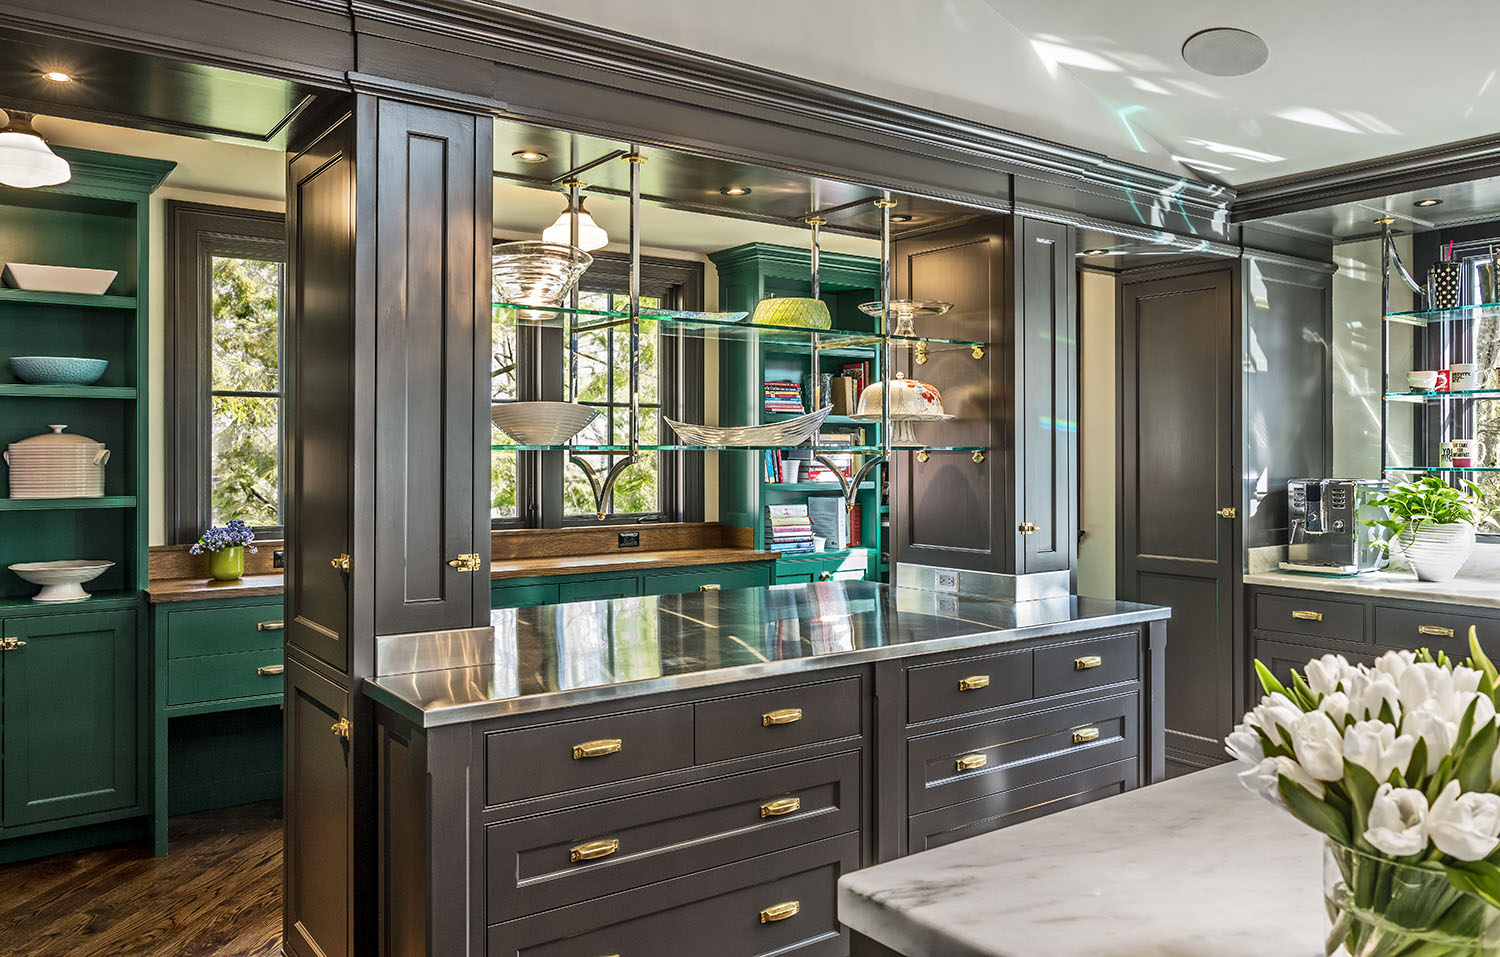 Custom cabinetry adds not only beauty and practicality; it can also create one-of-a-kind living spaces that—quite literally—are tailor made for the homeowner. For the spectacular kitchen shown here, a study in wood and glass work with an array of finishes